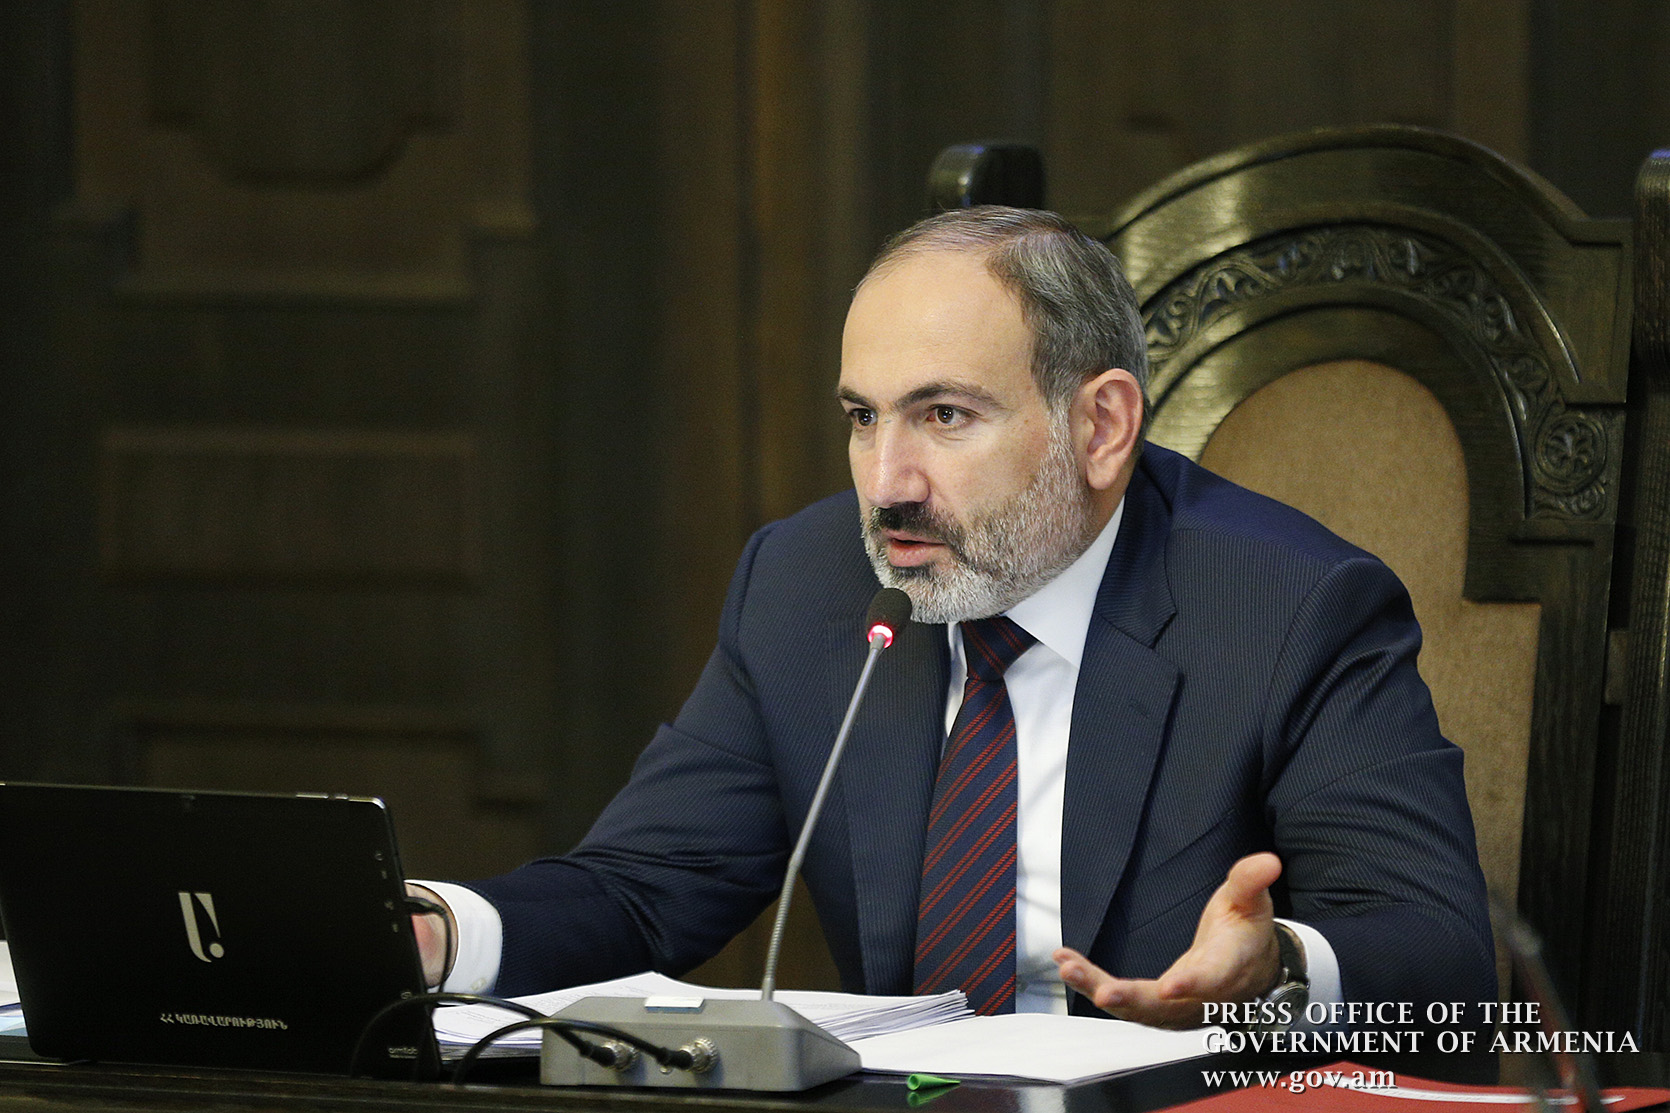 Only 2/3 of Cabinet members will be appointed in the near future – Nikol Pashinyan refers to government formation